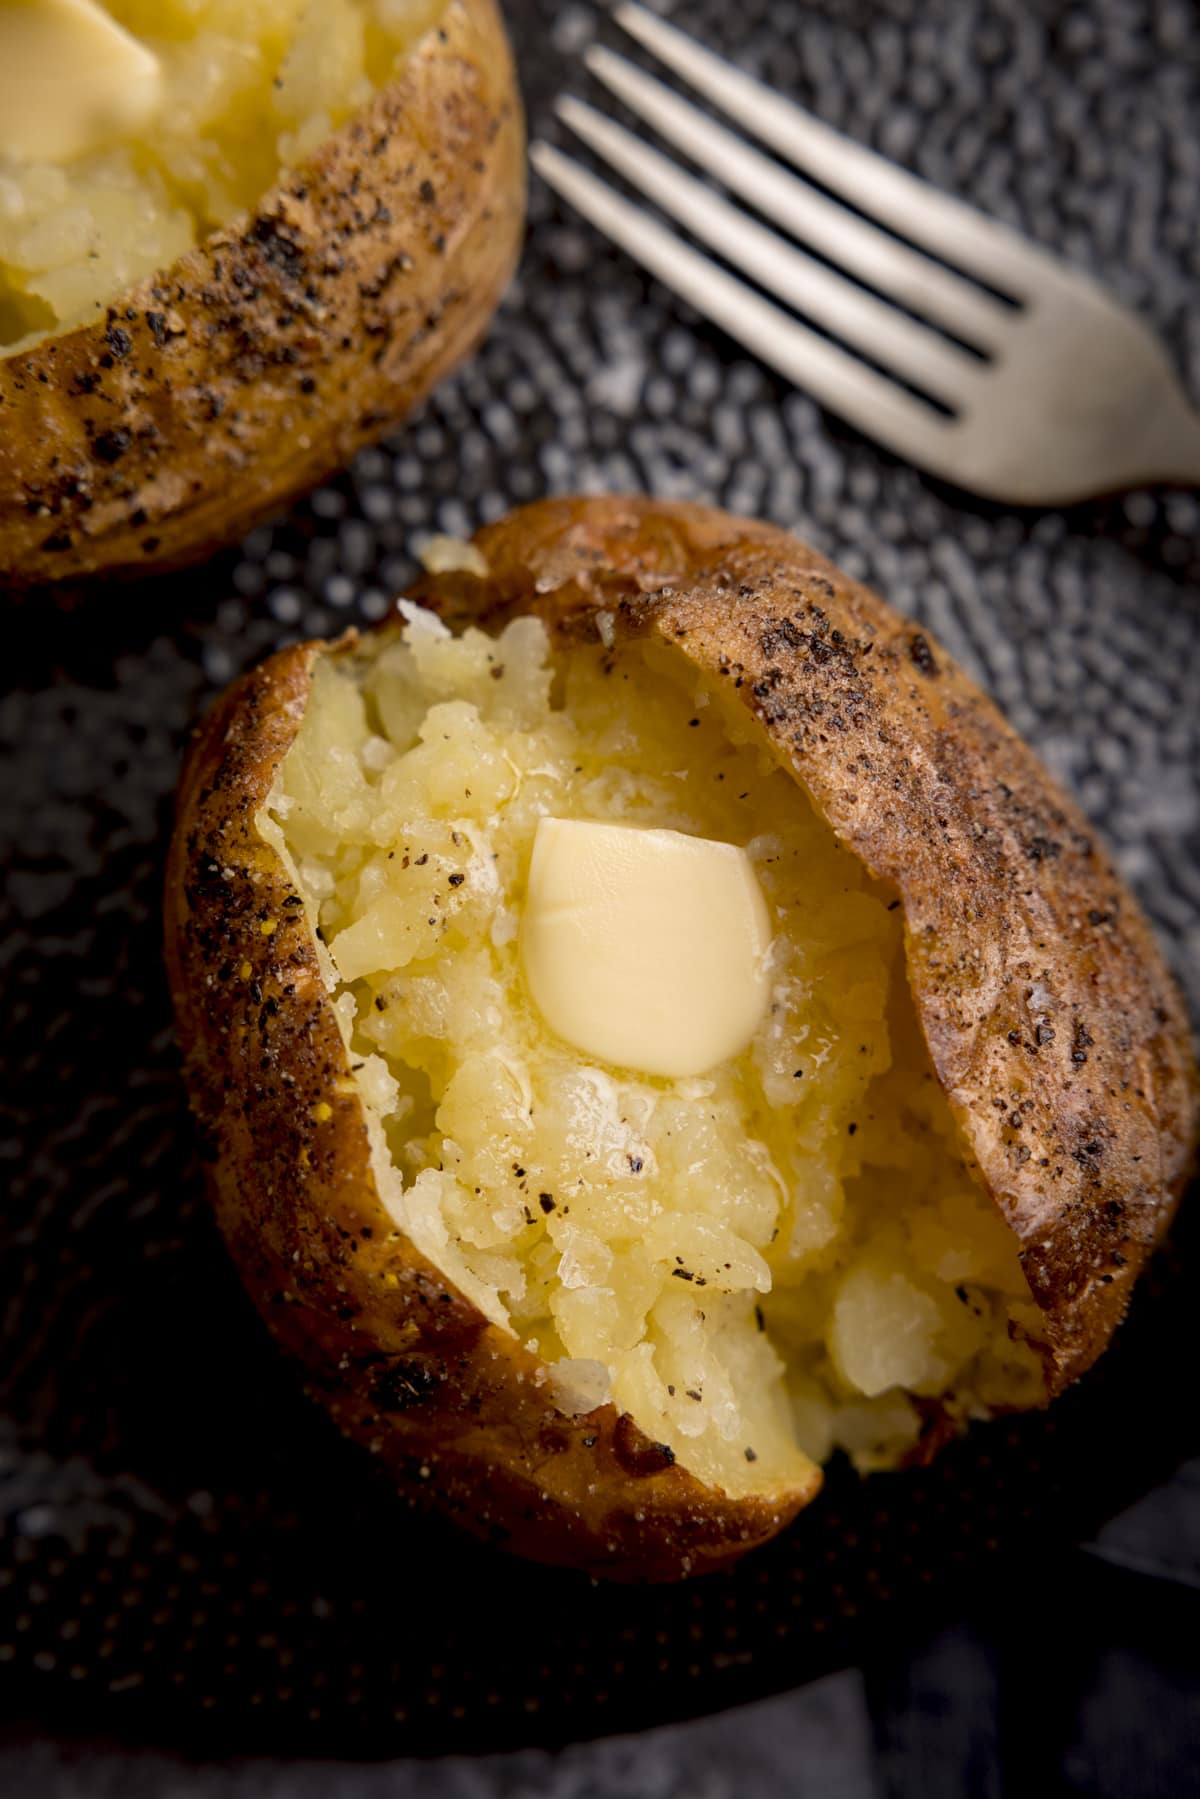 Overhead close-up image of a seasoned baked potato, sliced down the middle. The inside of the potato has been fluffed and there's a knob of melting butter inside. The potato is on a black textured plate. There is a silver fork just in view at the top right of the frame and a second baked potato just in view at the top left of the frame.